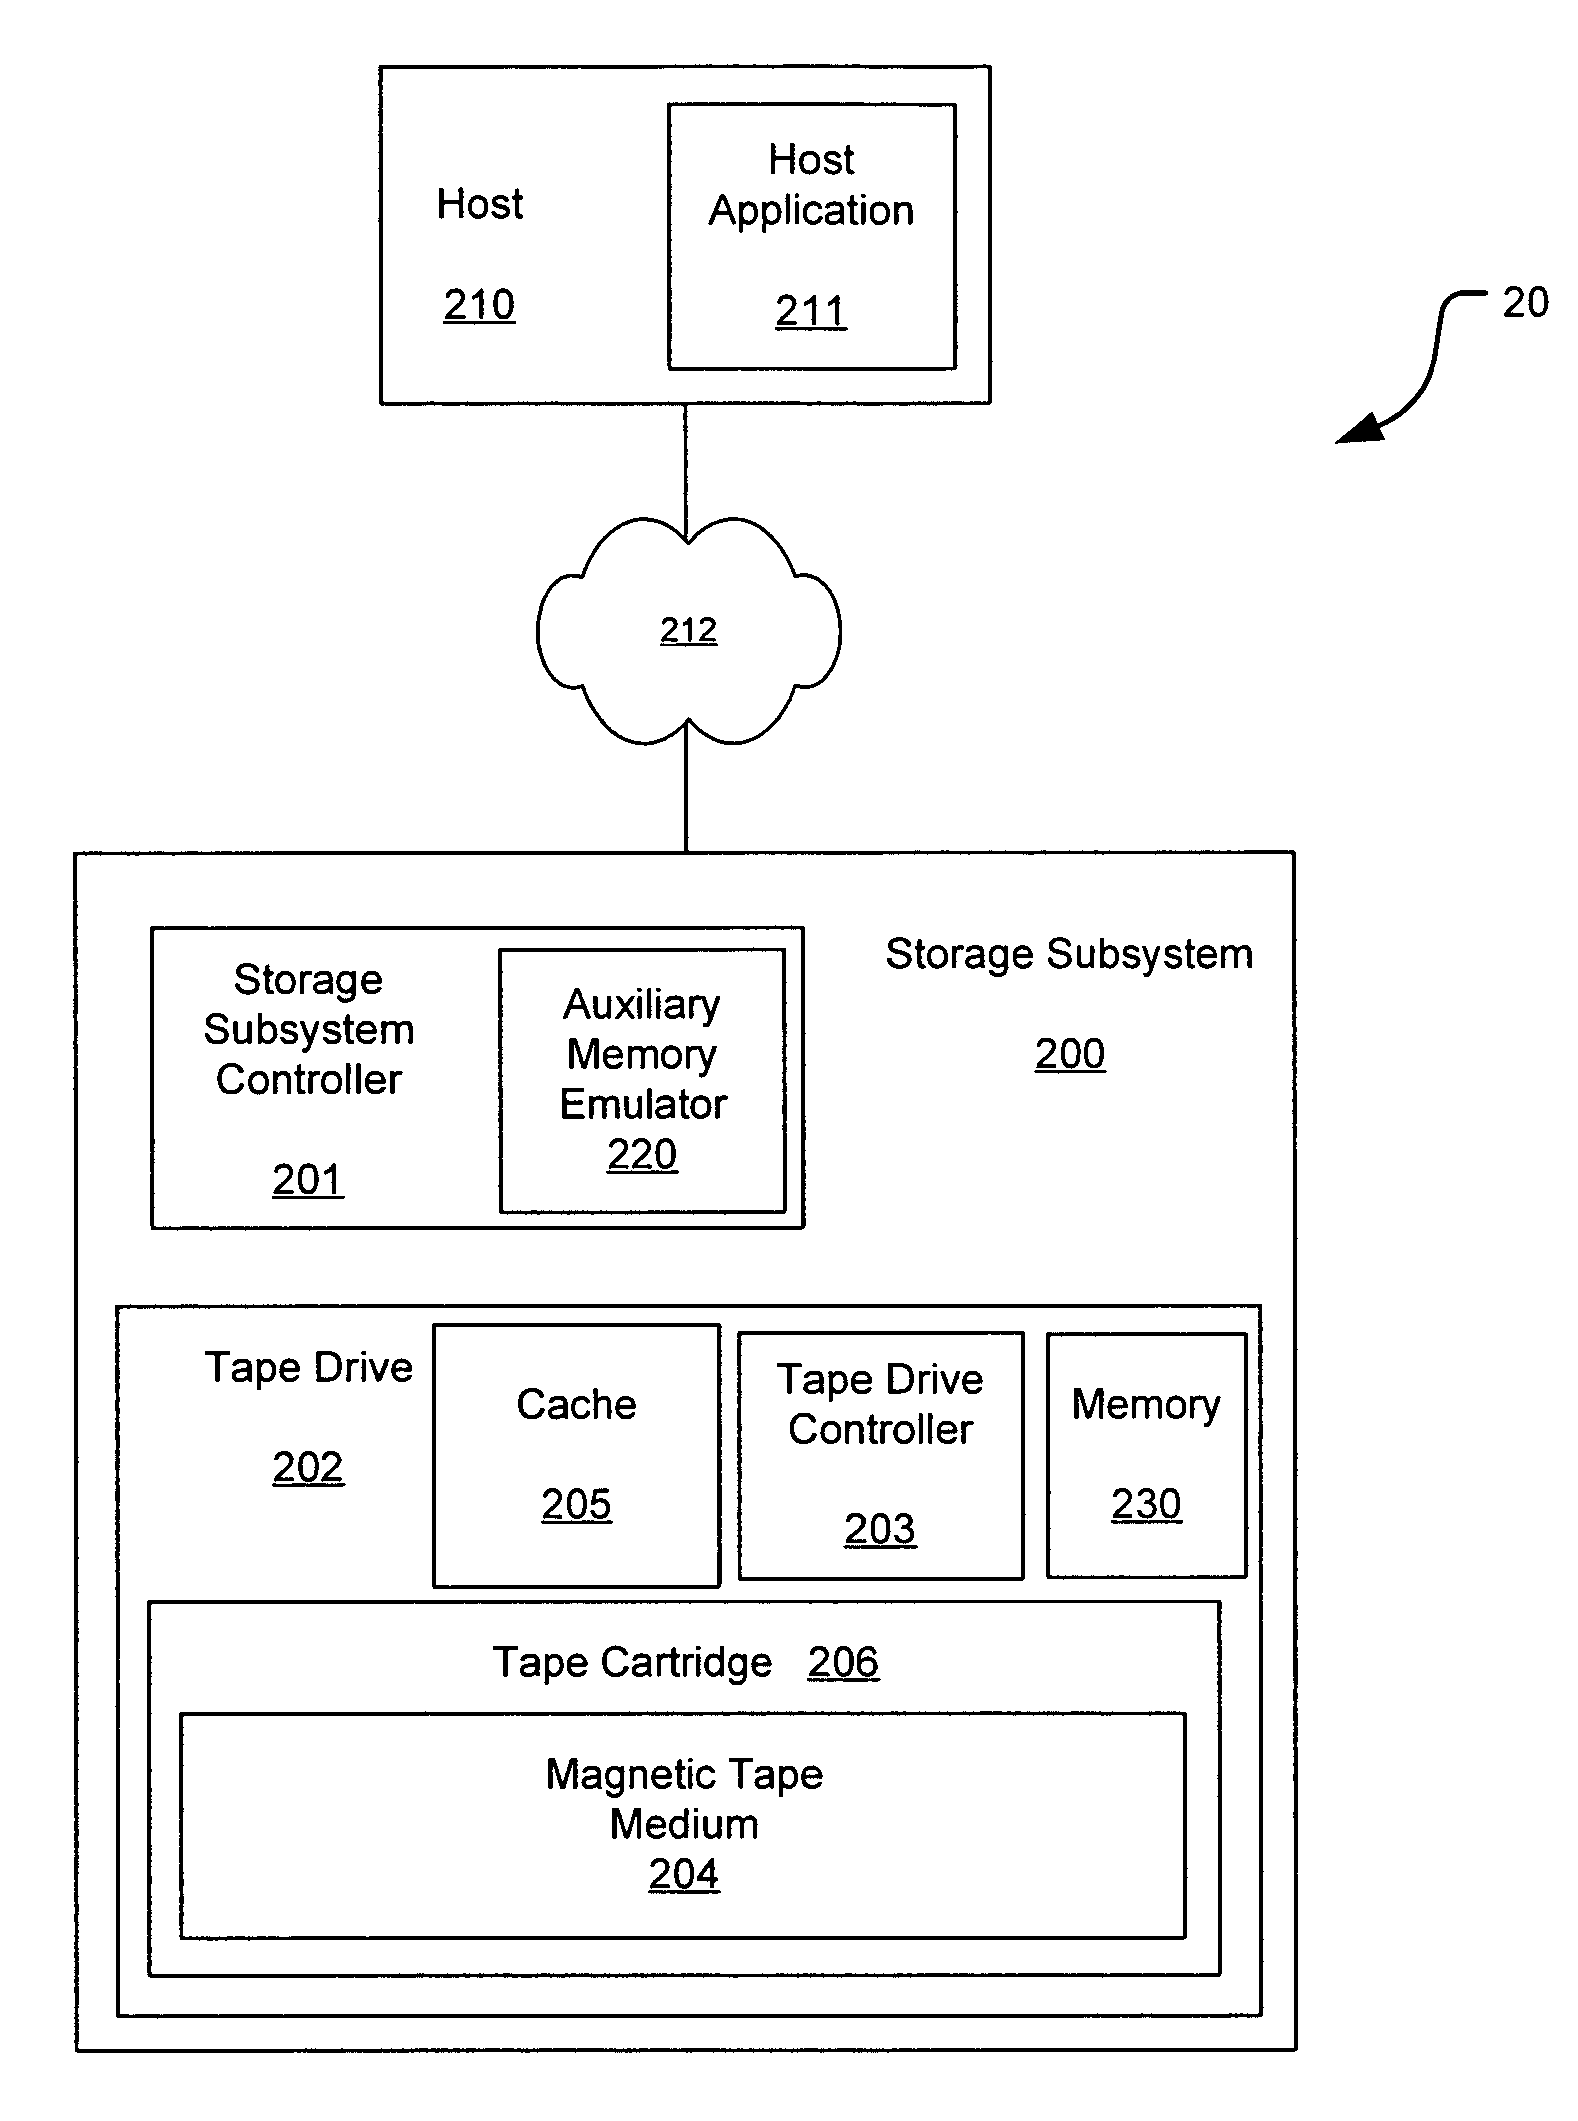 Methods and systems for providing predictive maintenance, preventative maintenance, and/or failure isolation in a tape storage subsystem